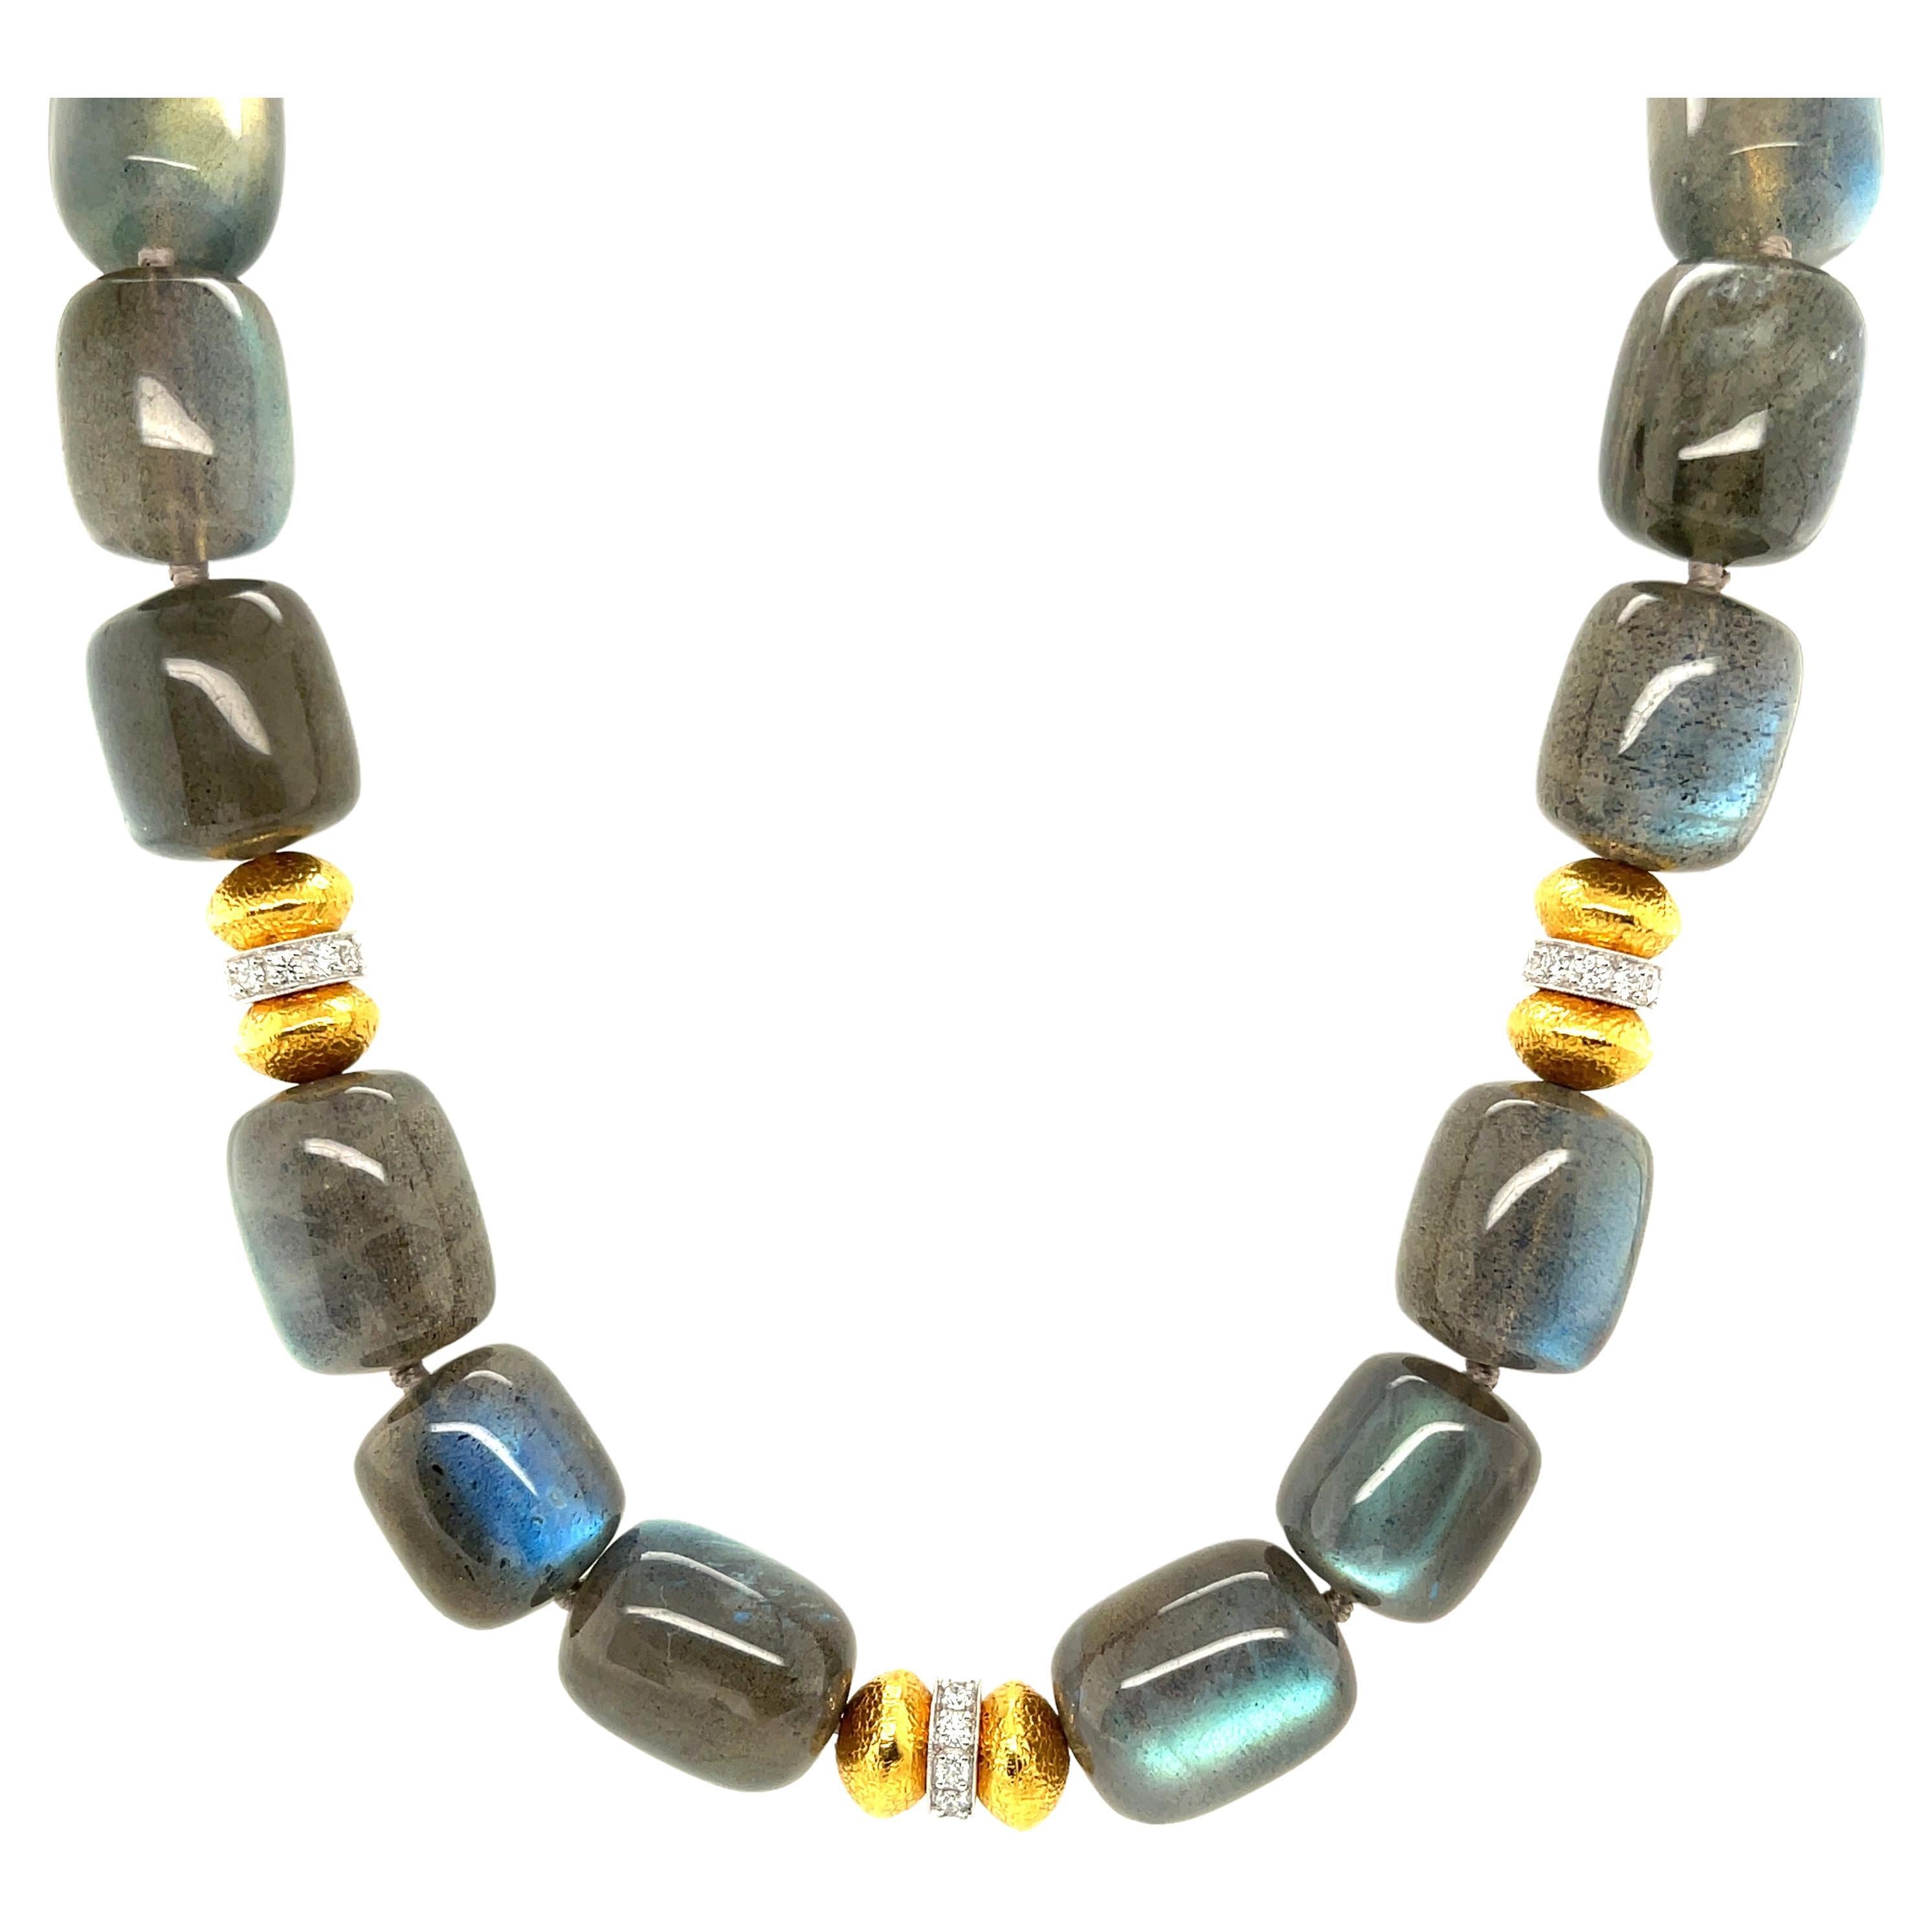  Labradorite Beaded Necklace with Diamonds and Yellow Gold Accents, 19 Inches